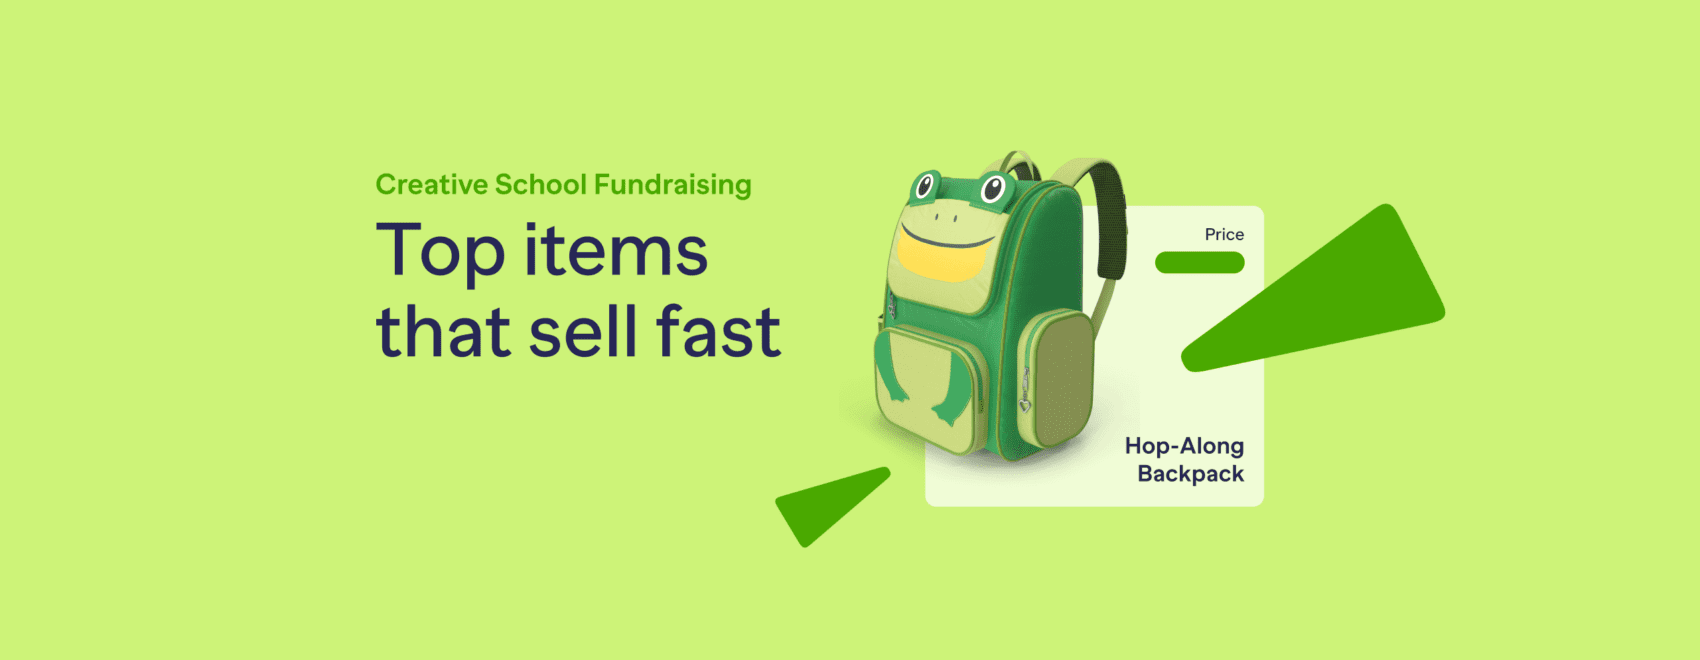 Creative school fundraising top items that sell fast